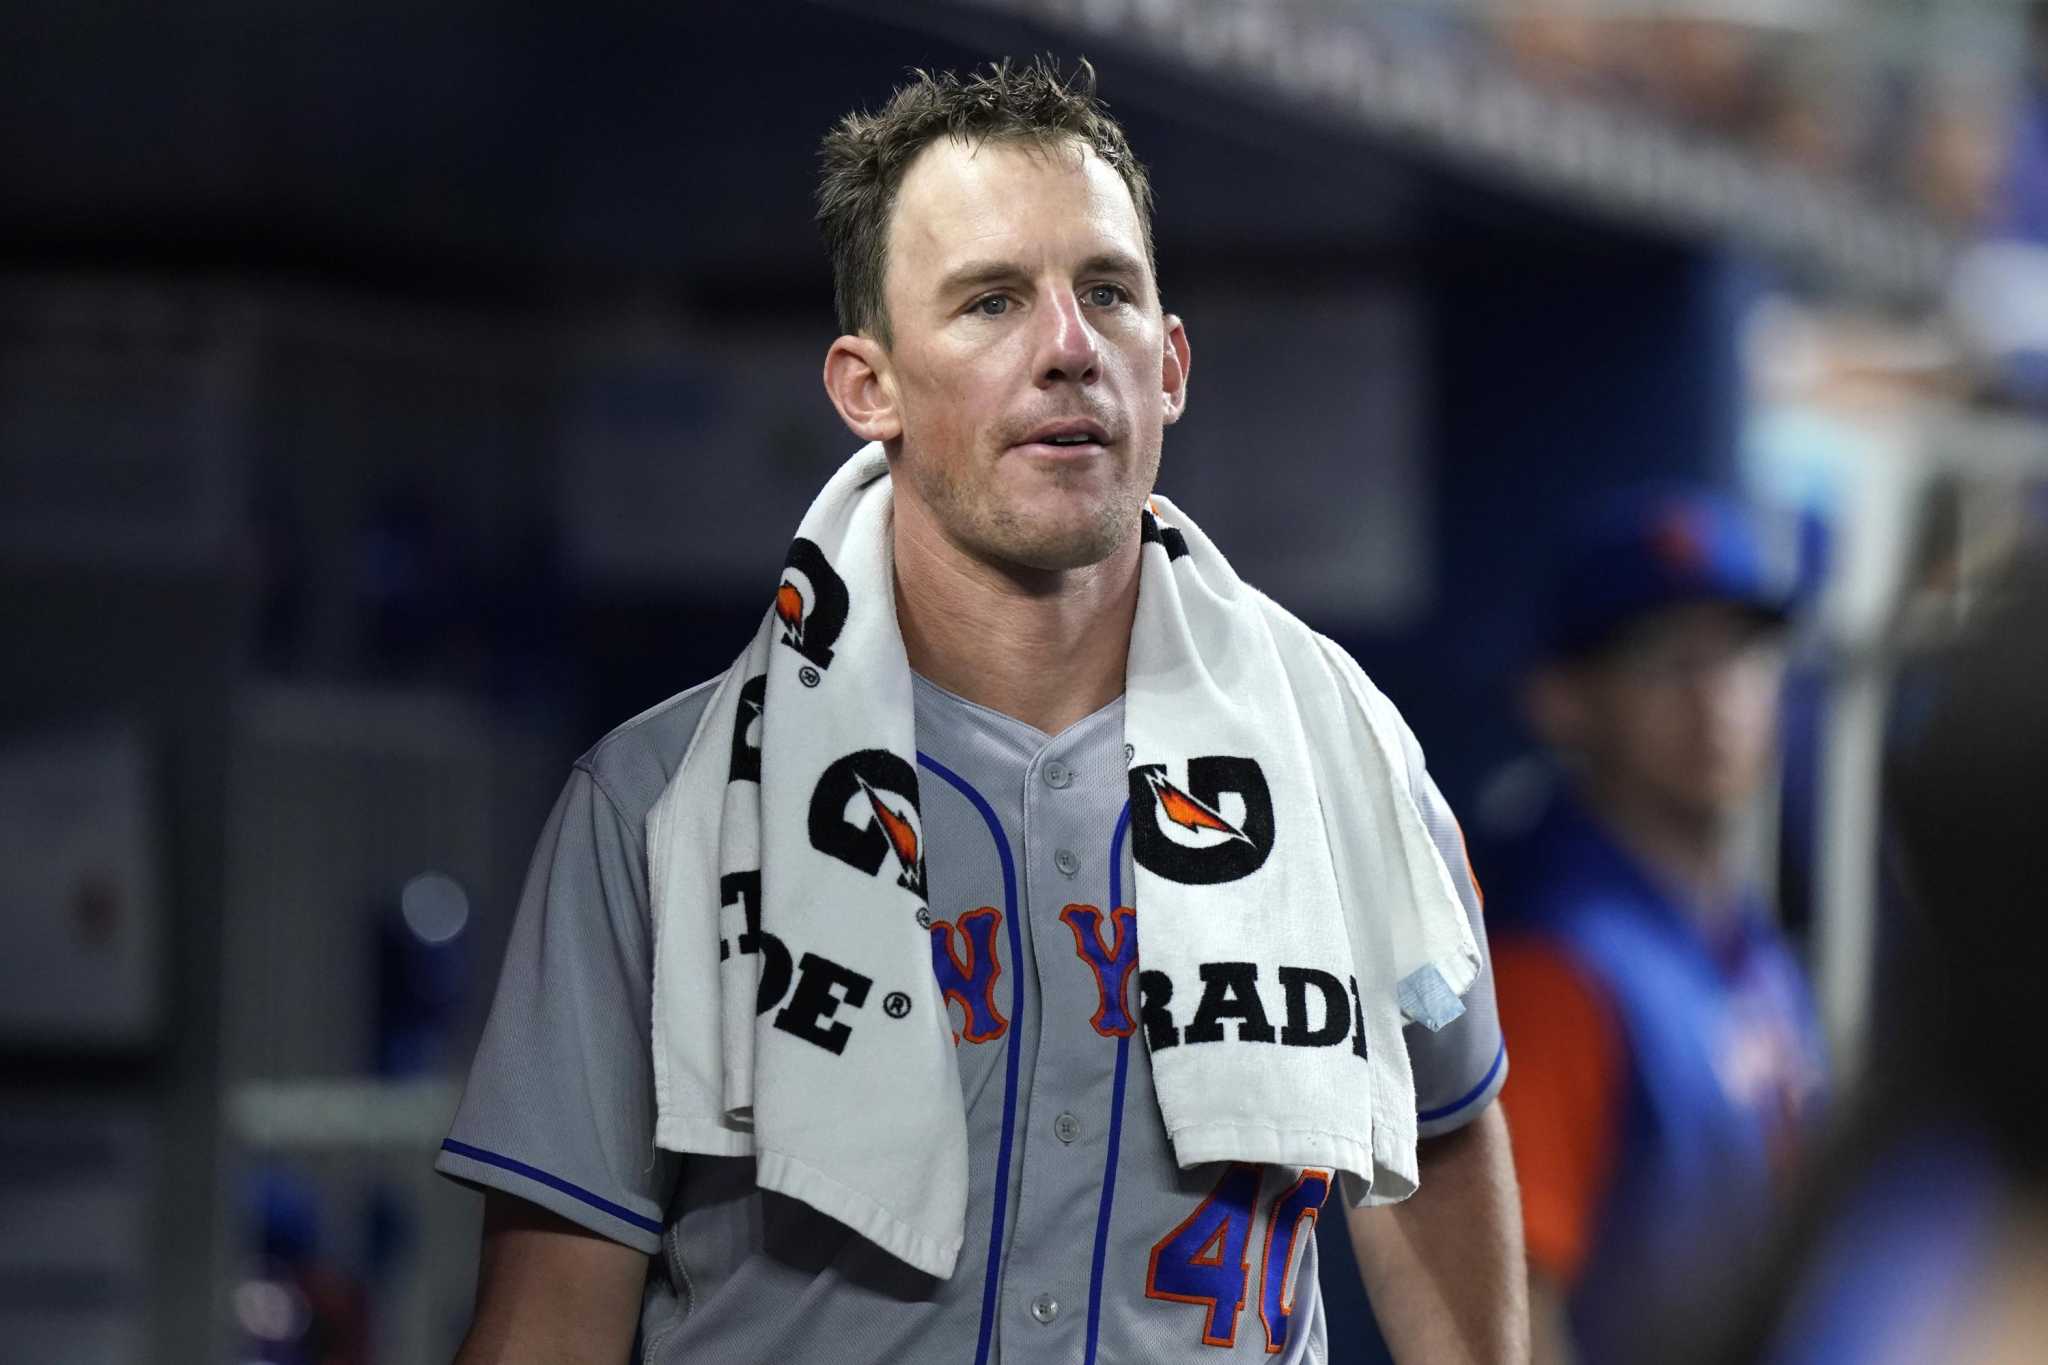 New York Mets news: Team has 2 positive COVID-19 tests, Thursday's